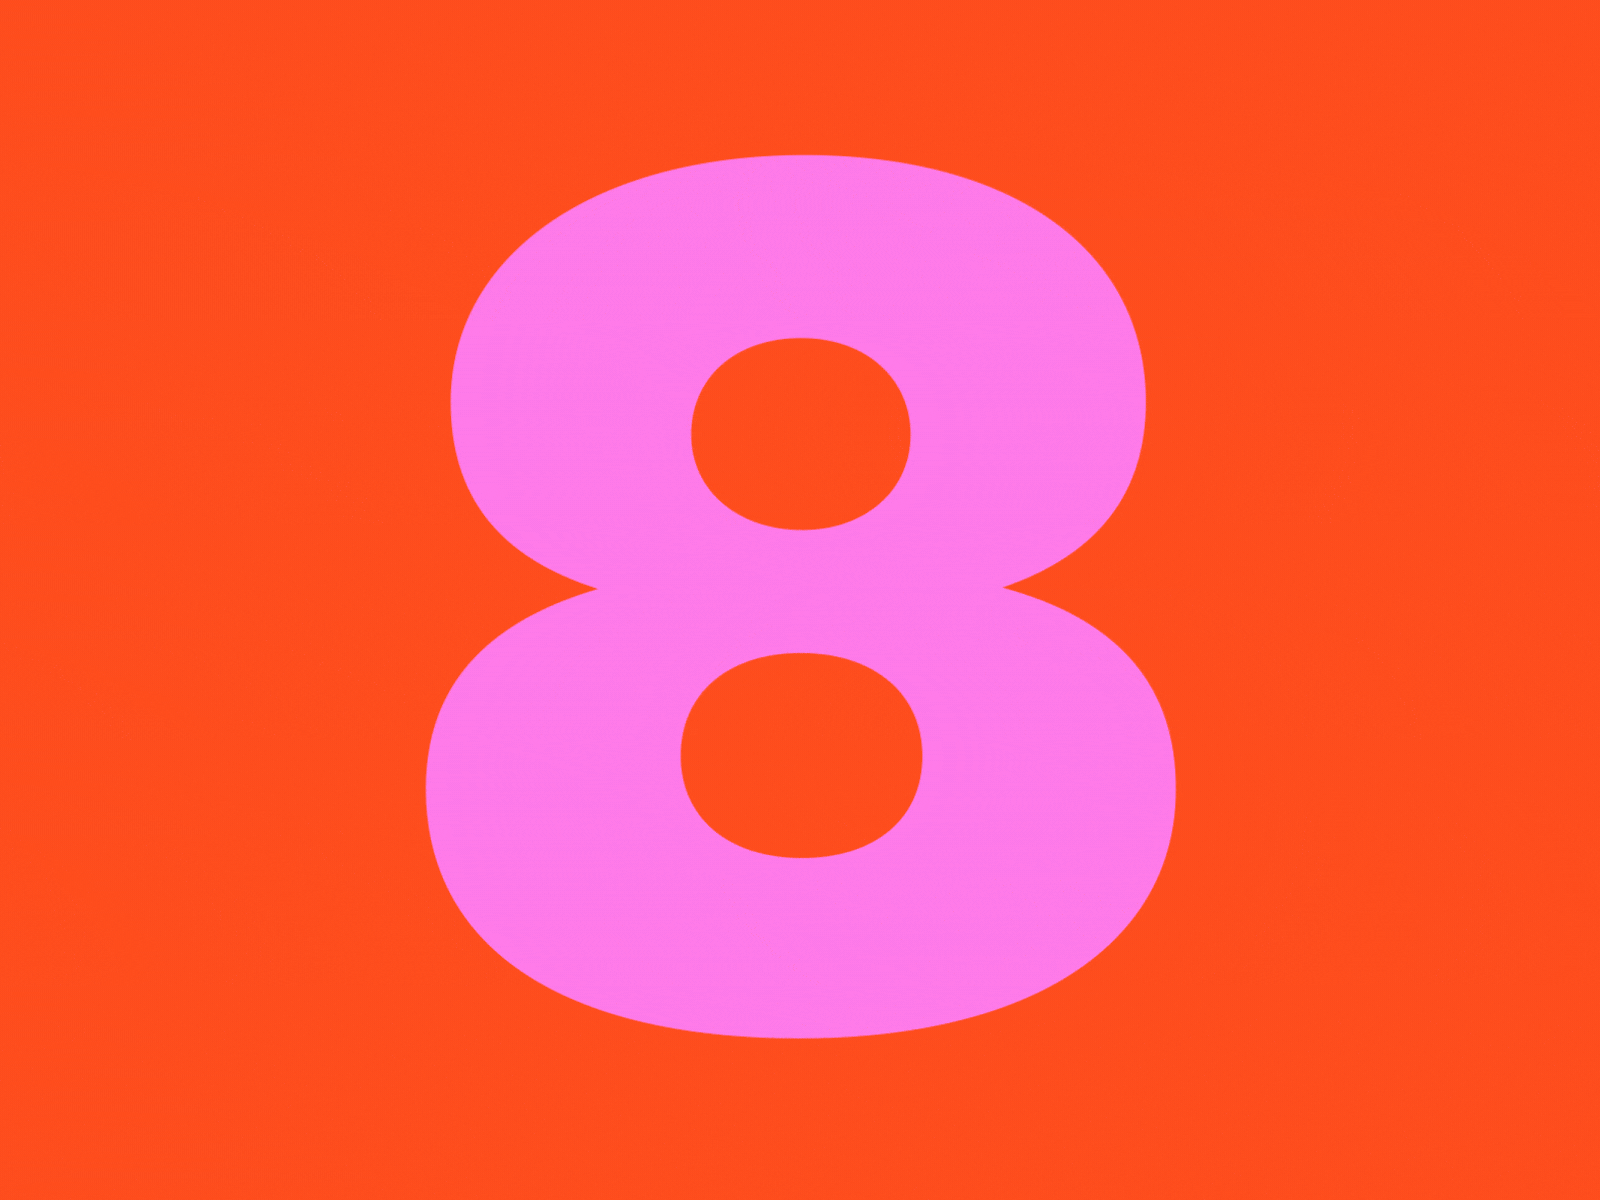 36 Days of Type / 8 36 days of type 36daysoftype 36daysoftype08 36dot ae after effects animated animated type animation animography colors design kinetic kinetic type motion motion design motion graphic motion graphics type typography